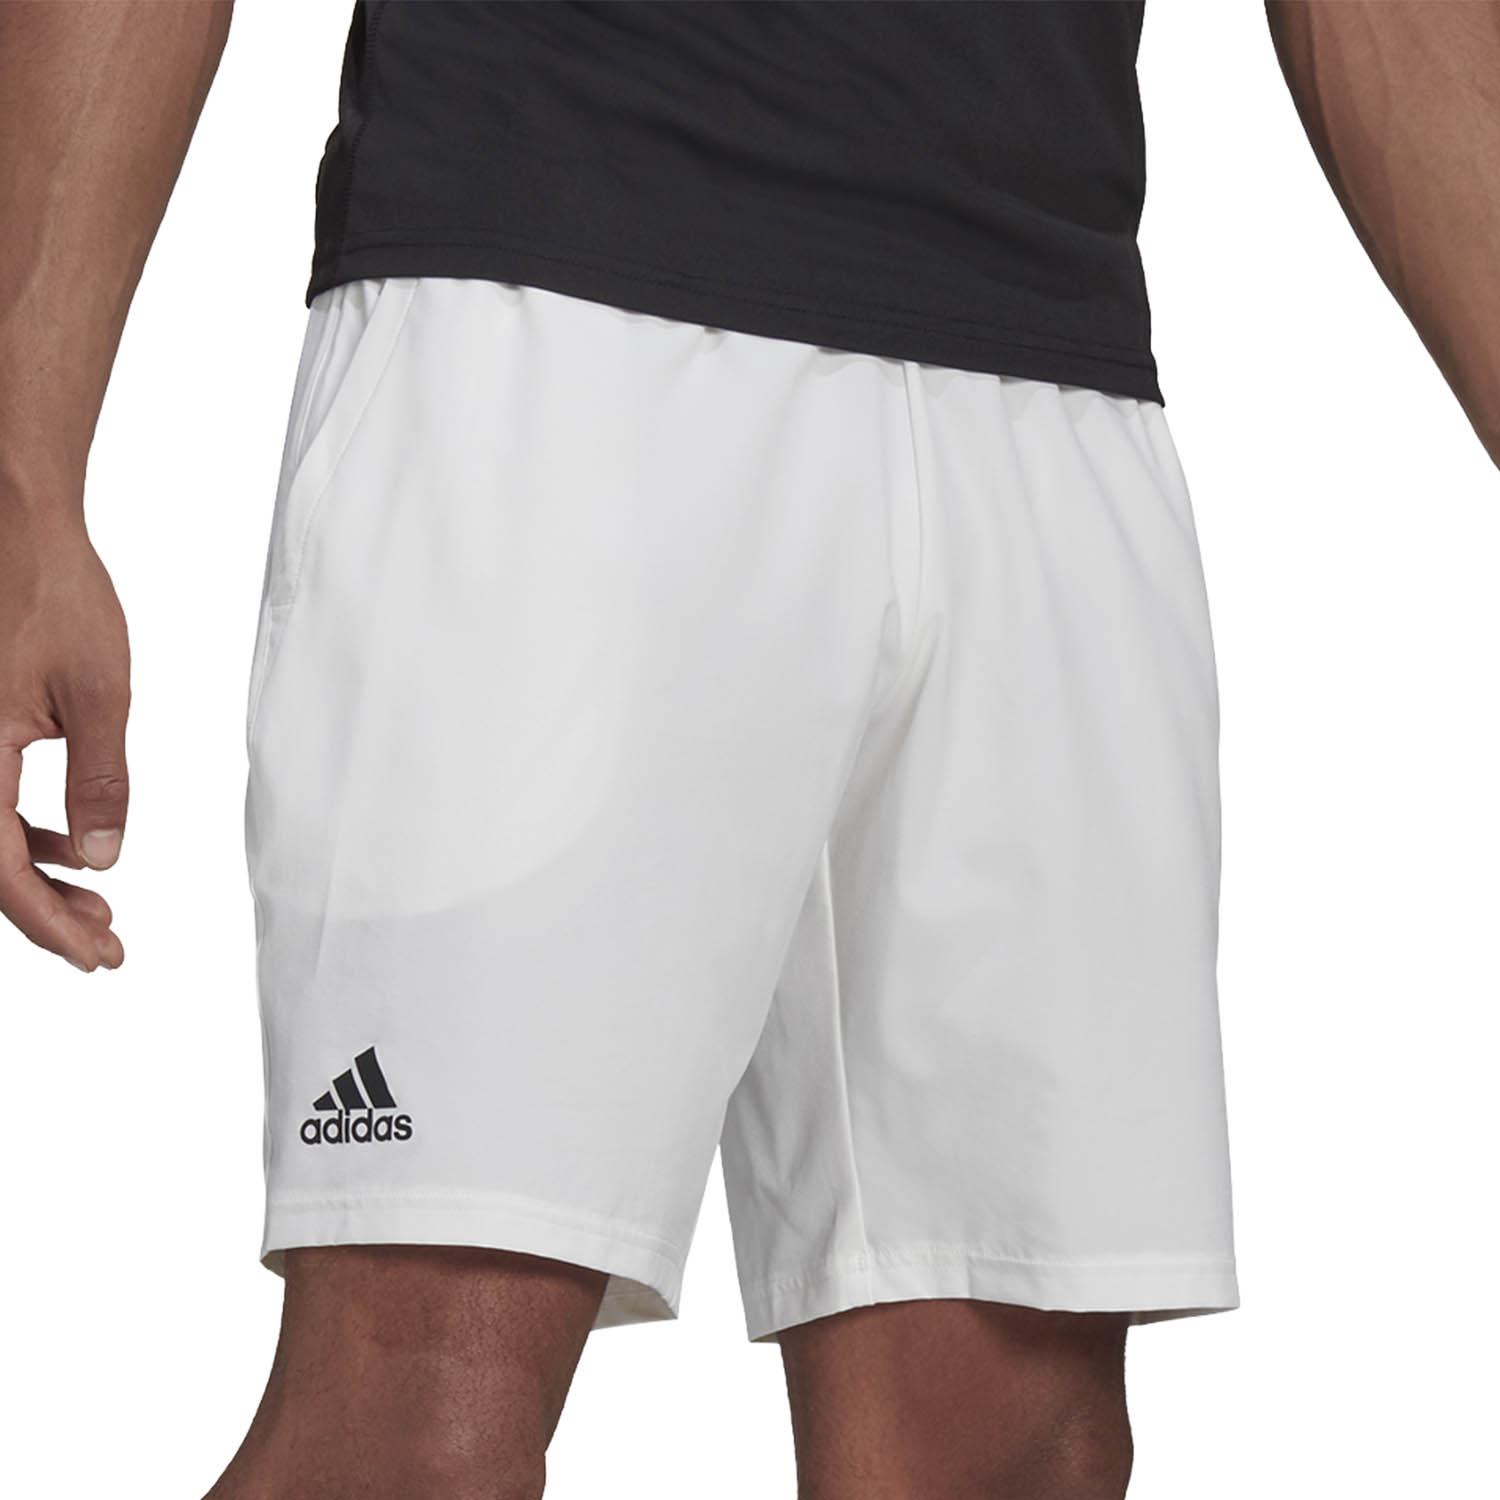 Homme Shorts Visiter la boutique adidasadidas Club Stretch-Woven Tennis Shorts 1/4 - Sport 